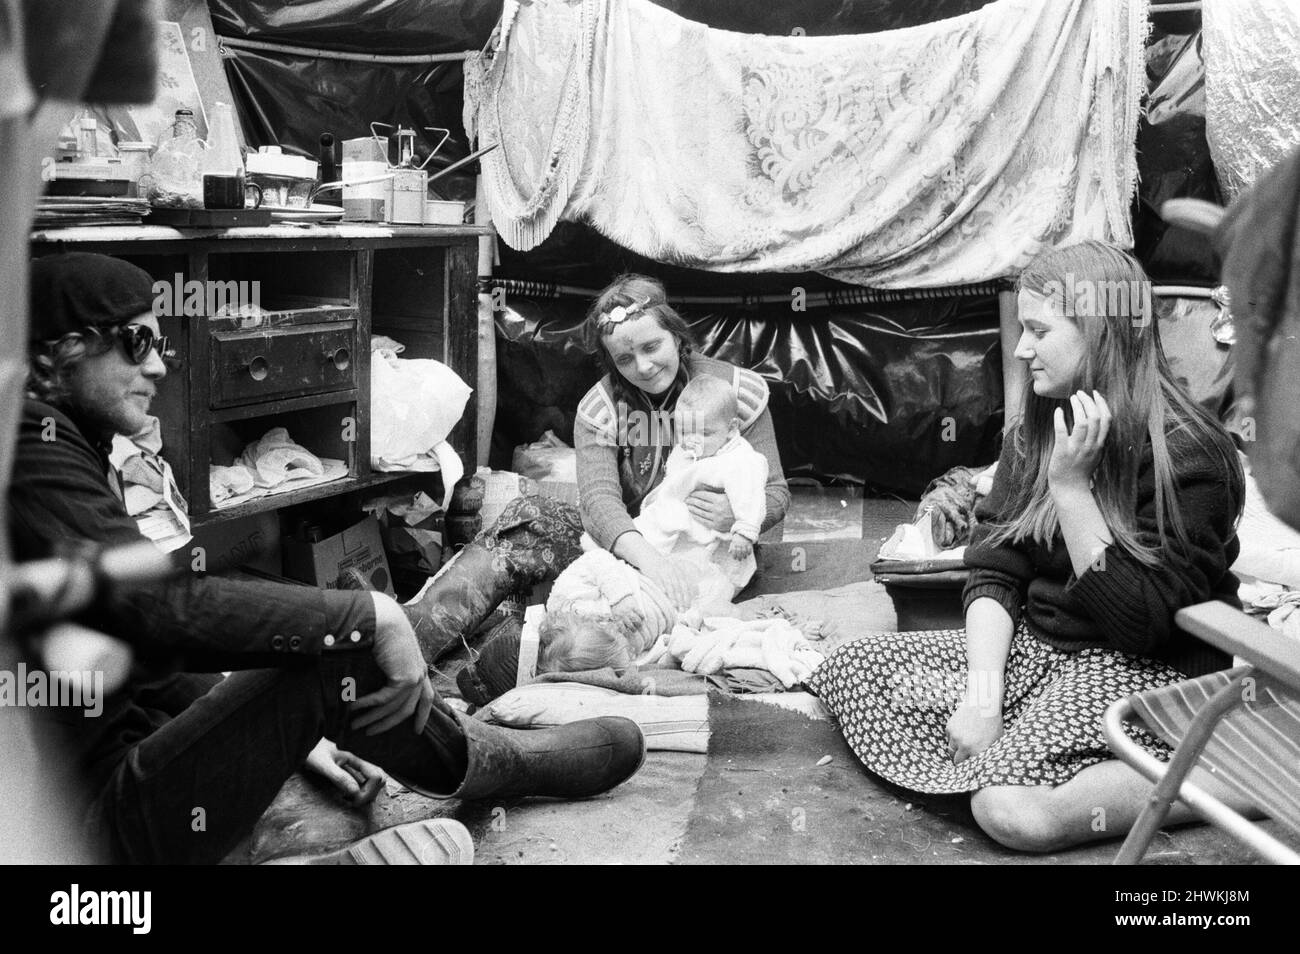 The Glastonbury Fayre of 1971, a free festival planned by Andrew Kerr and Arabella Churchill .Picture shows: Hippies inside their rain igloo at the festival. 19th June 1971. Stock Photo